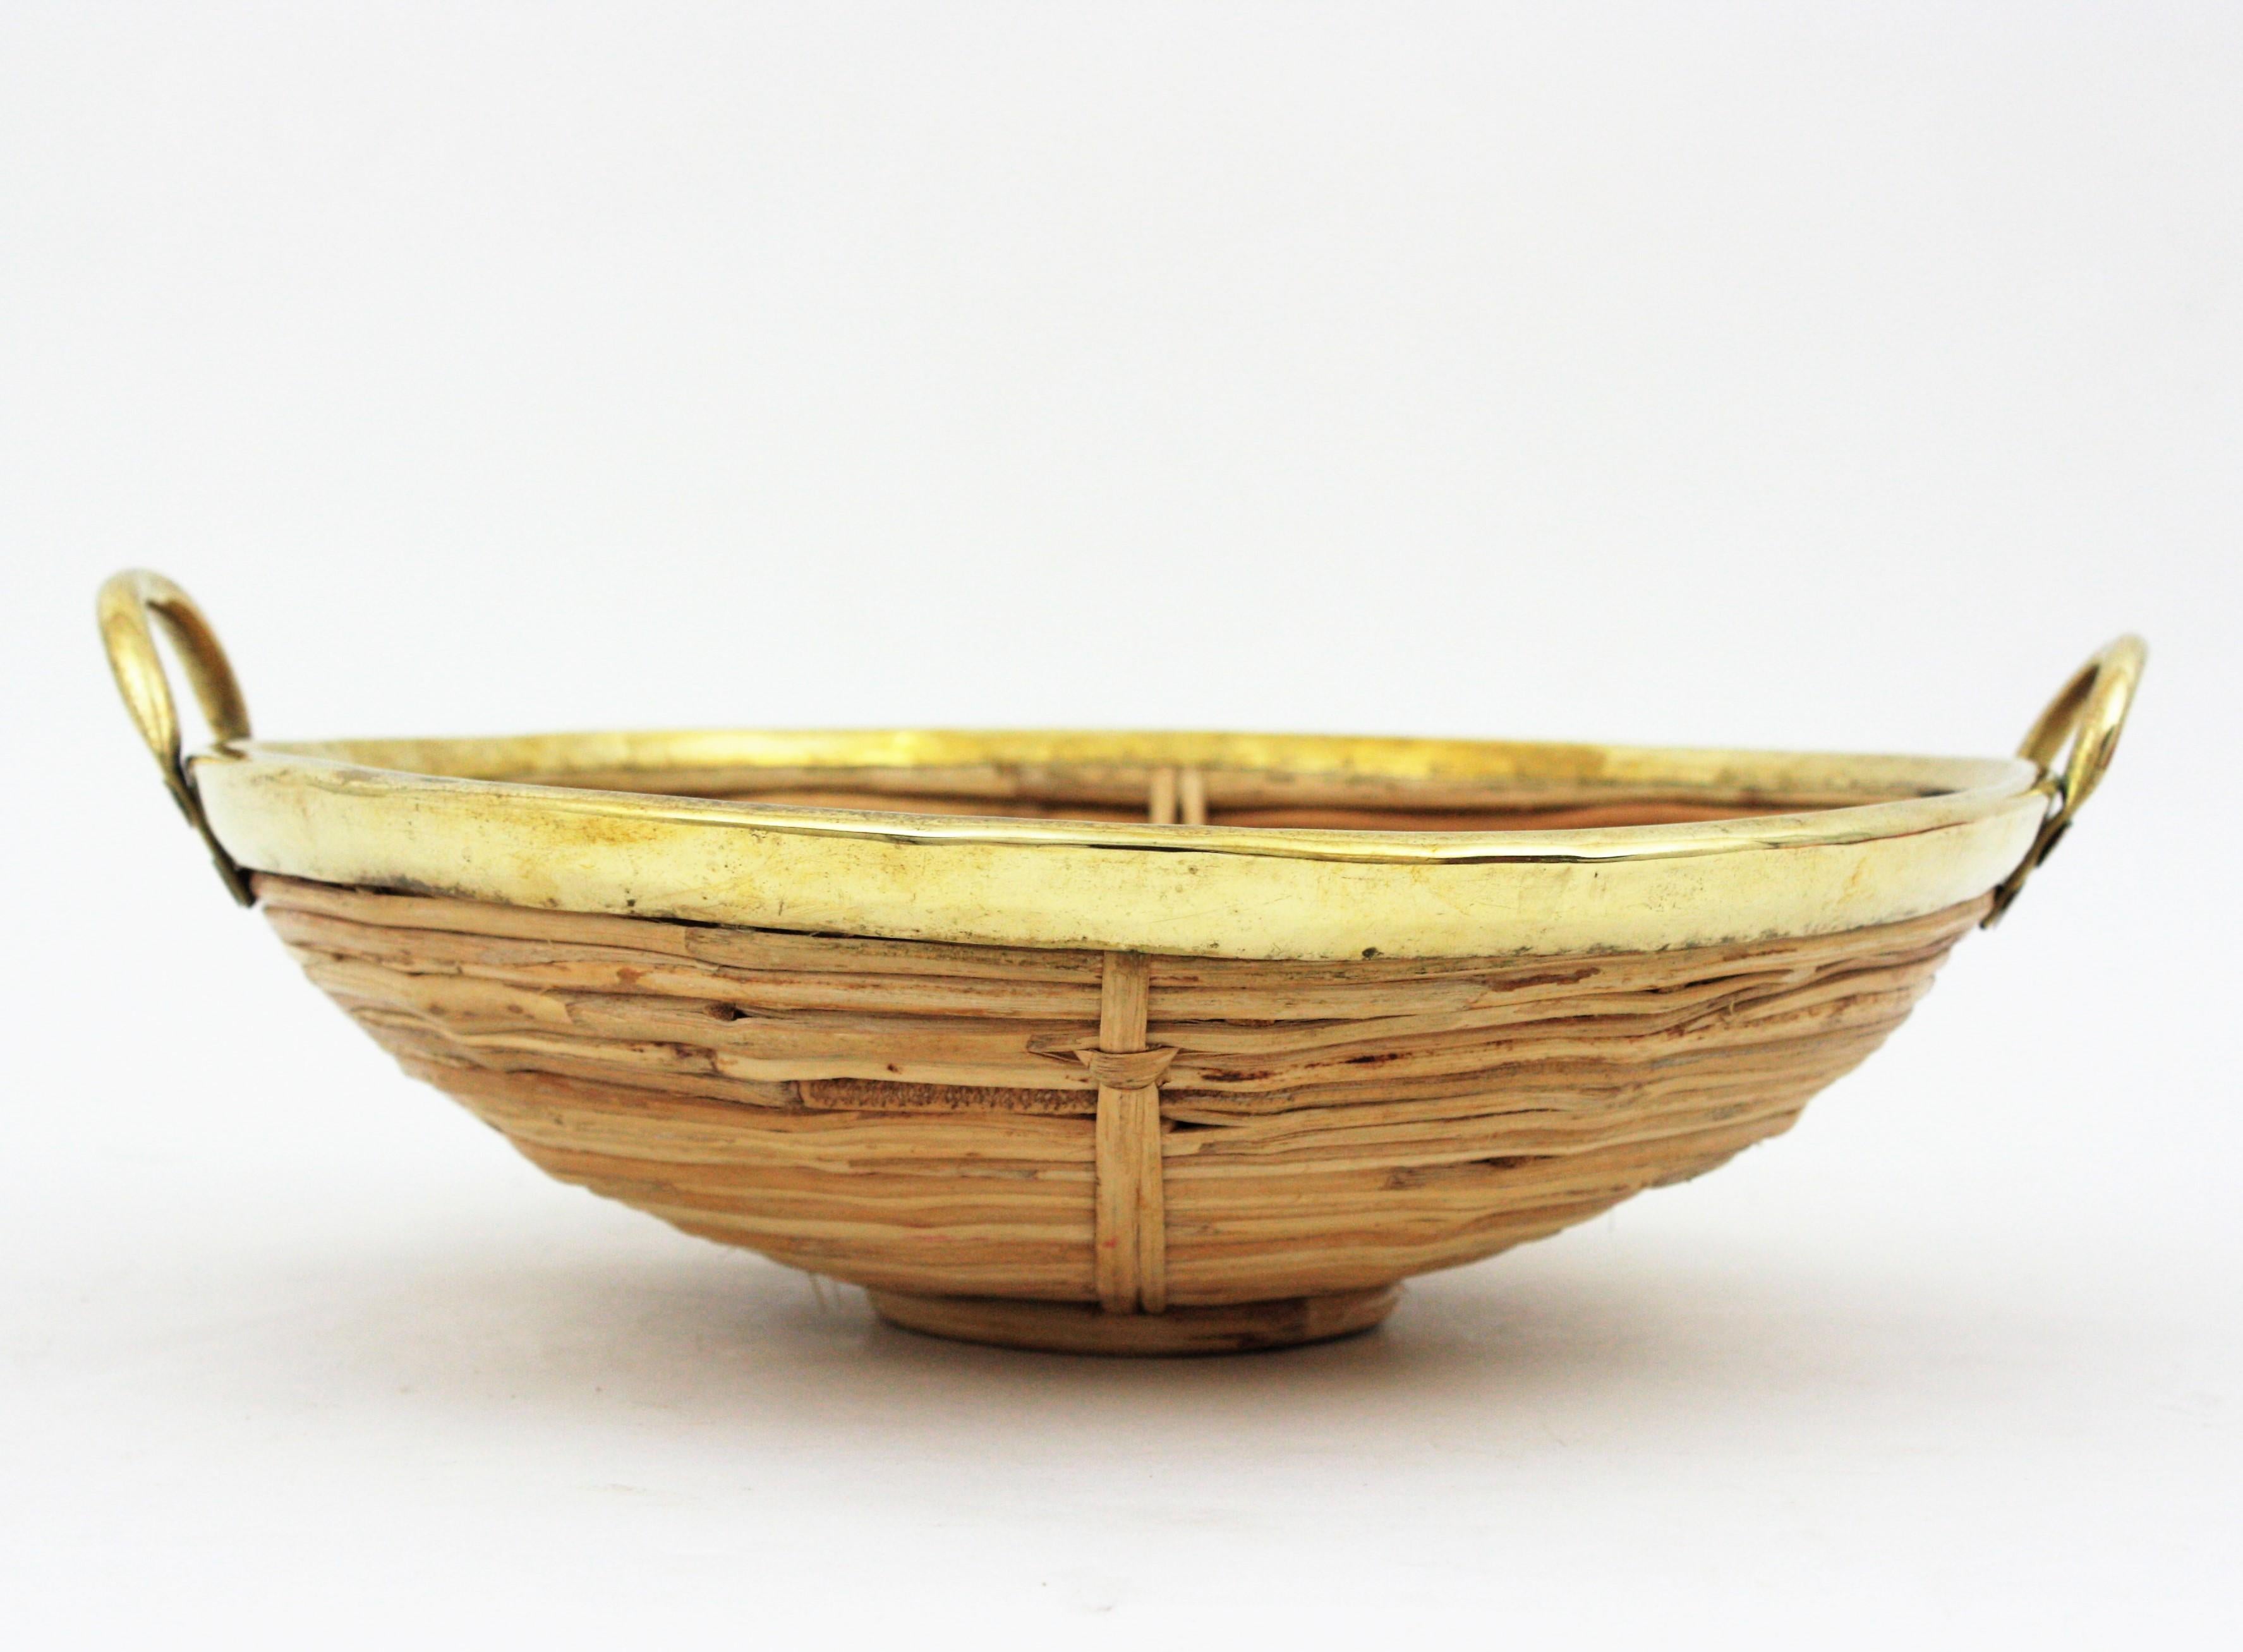 Rattan and Brass Italian Centerpiece Basket with Handles, 1970s For Sale 6